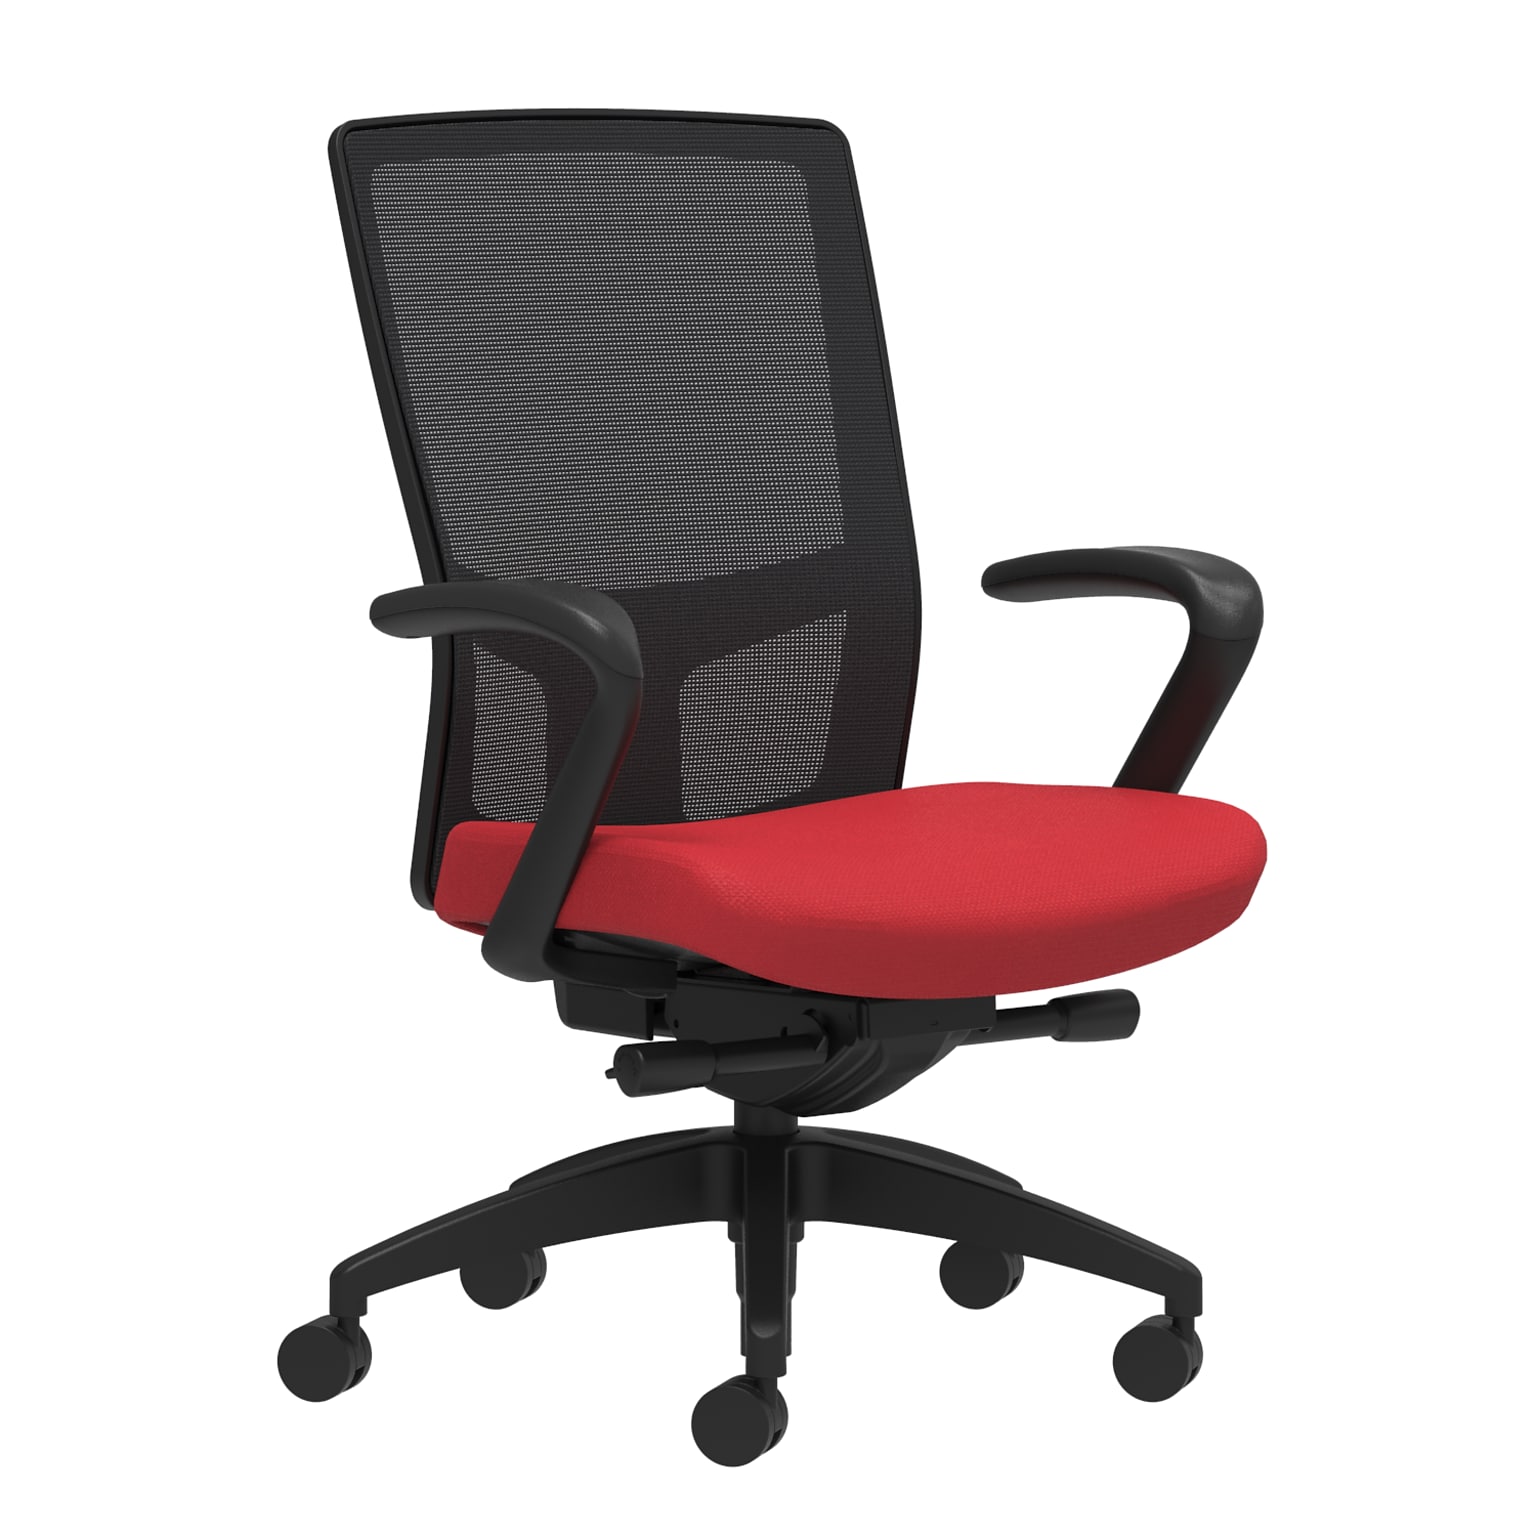 Union & Scale Workplace2.0™ Fabric Task Chair, Cherry, Integrated Lumbar, Fixed Arms, Advanced Synchro-Tilt Seat Control (53664)